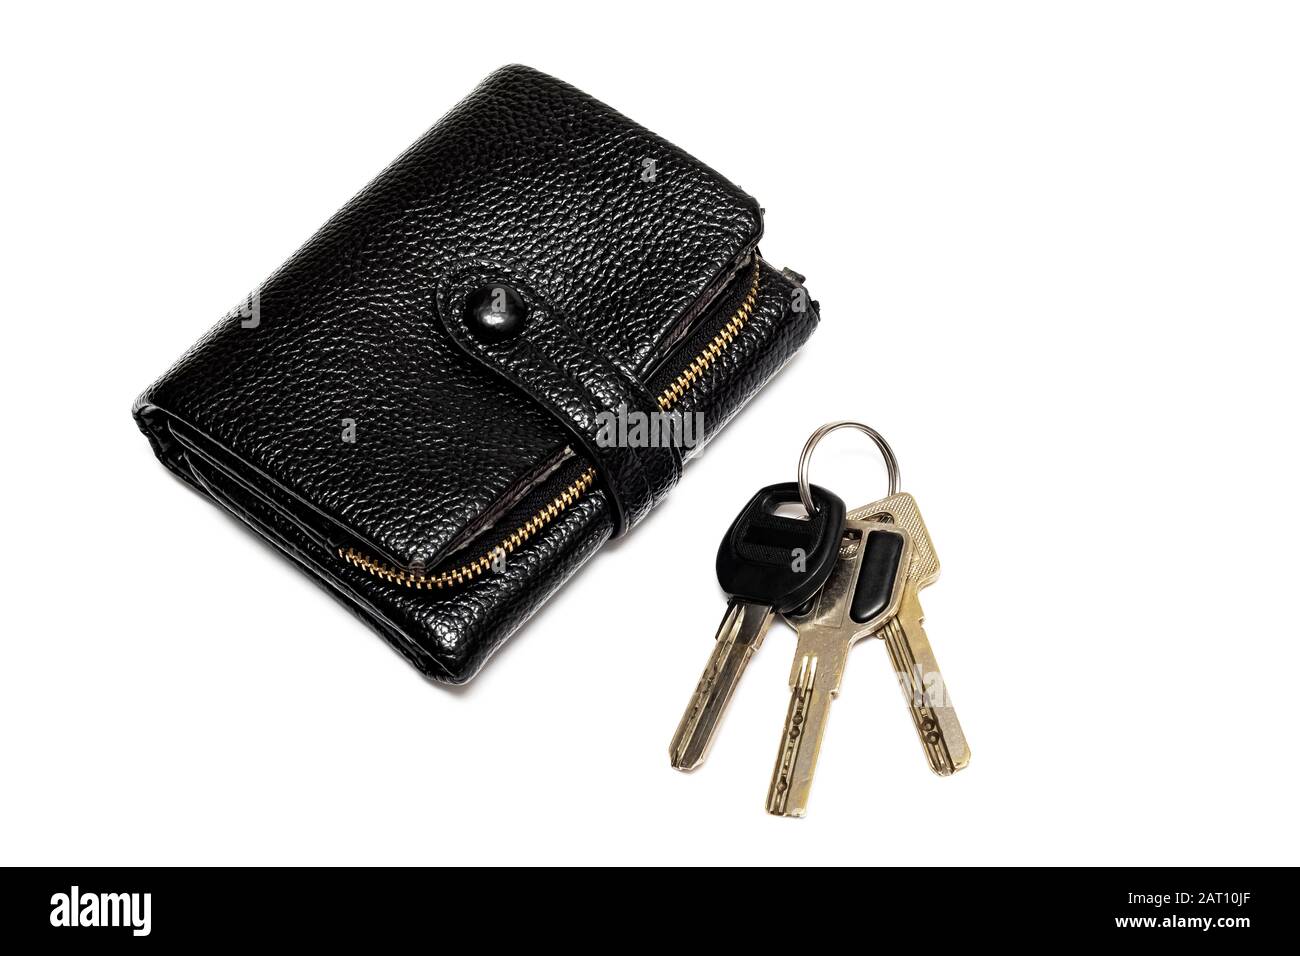 House and car keys, wallet, mobile phone and face mask on wooden surface.  Ready to go out in the new world Stock Photo - Alamy